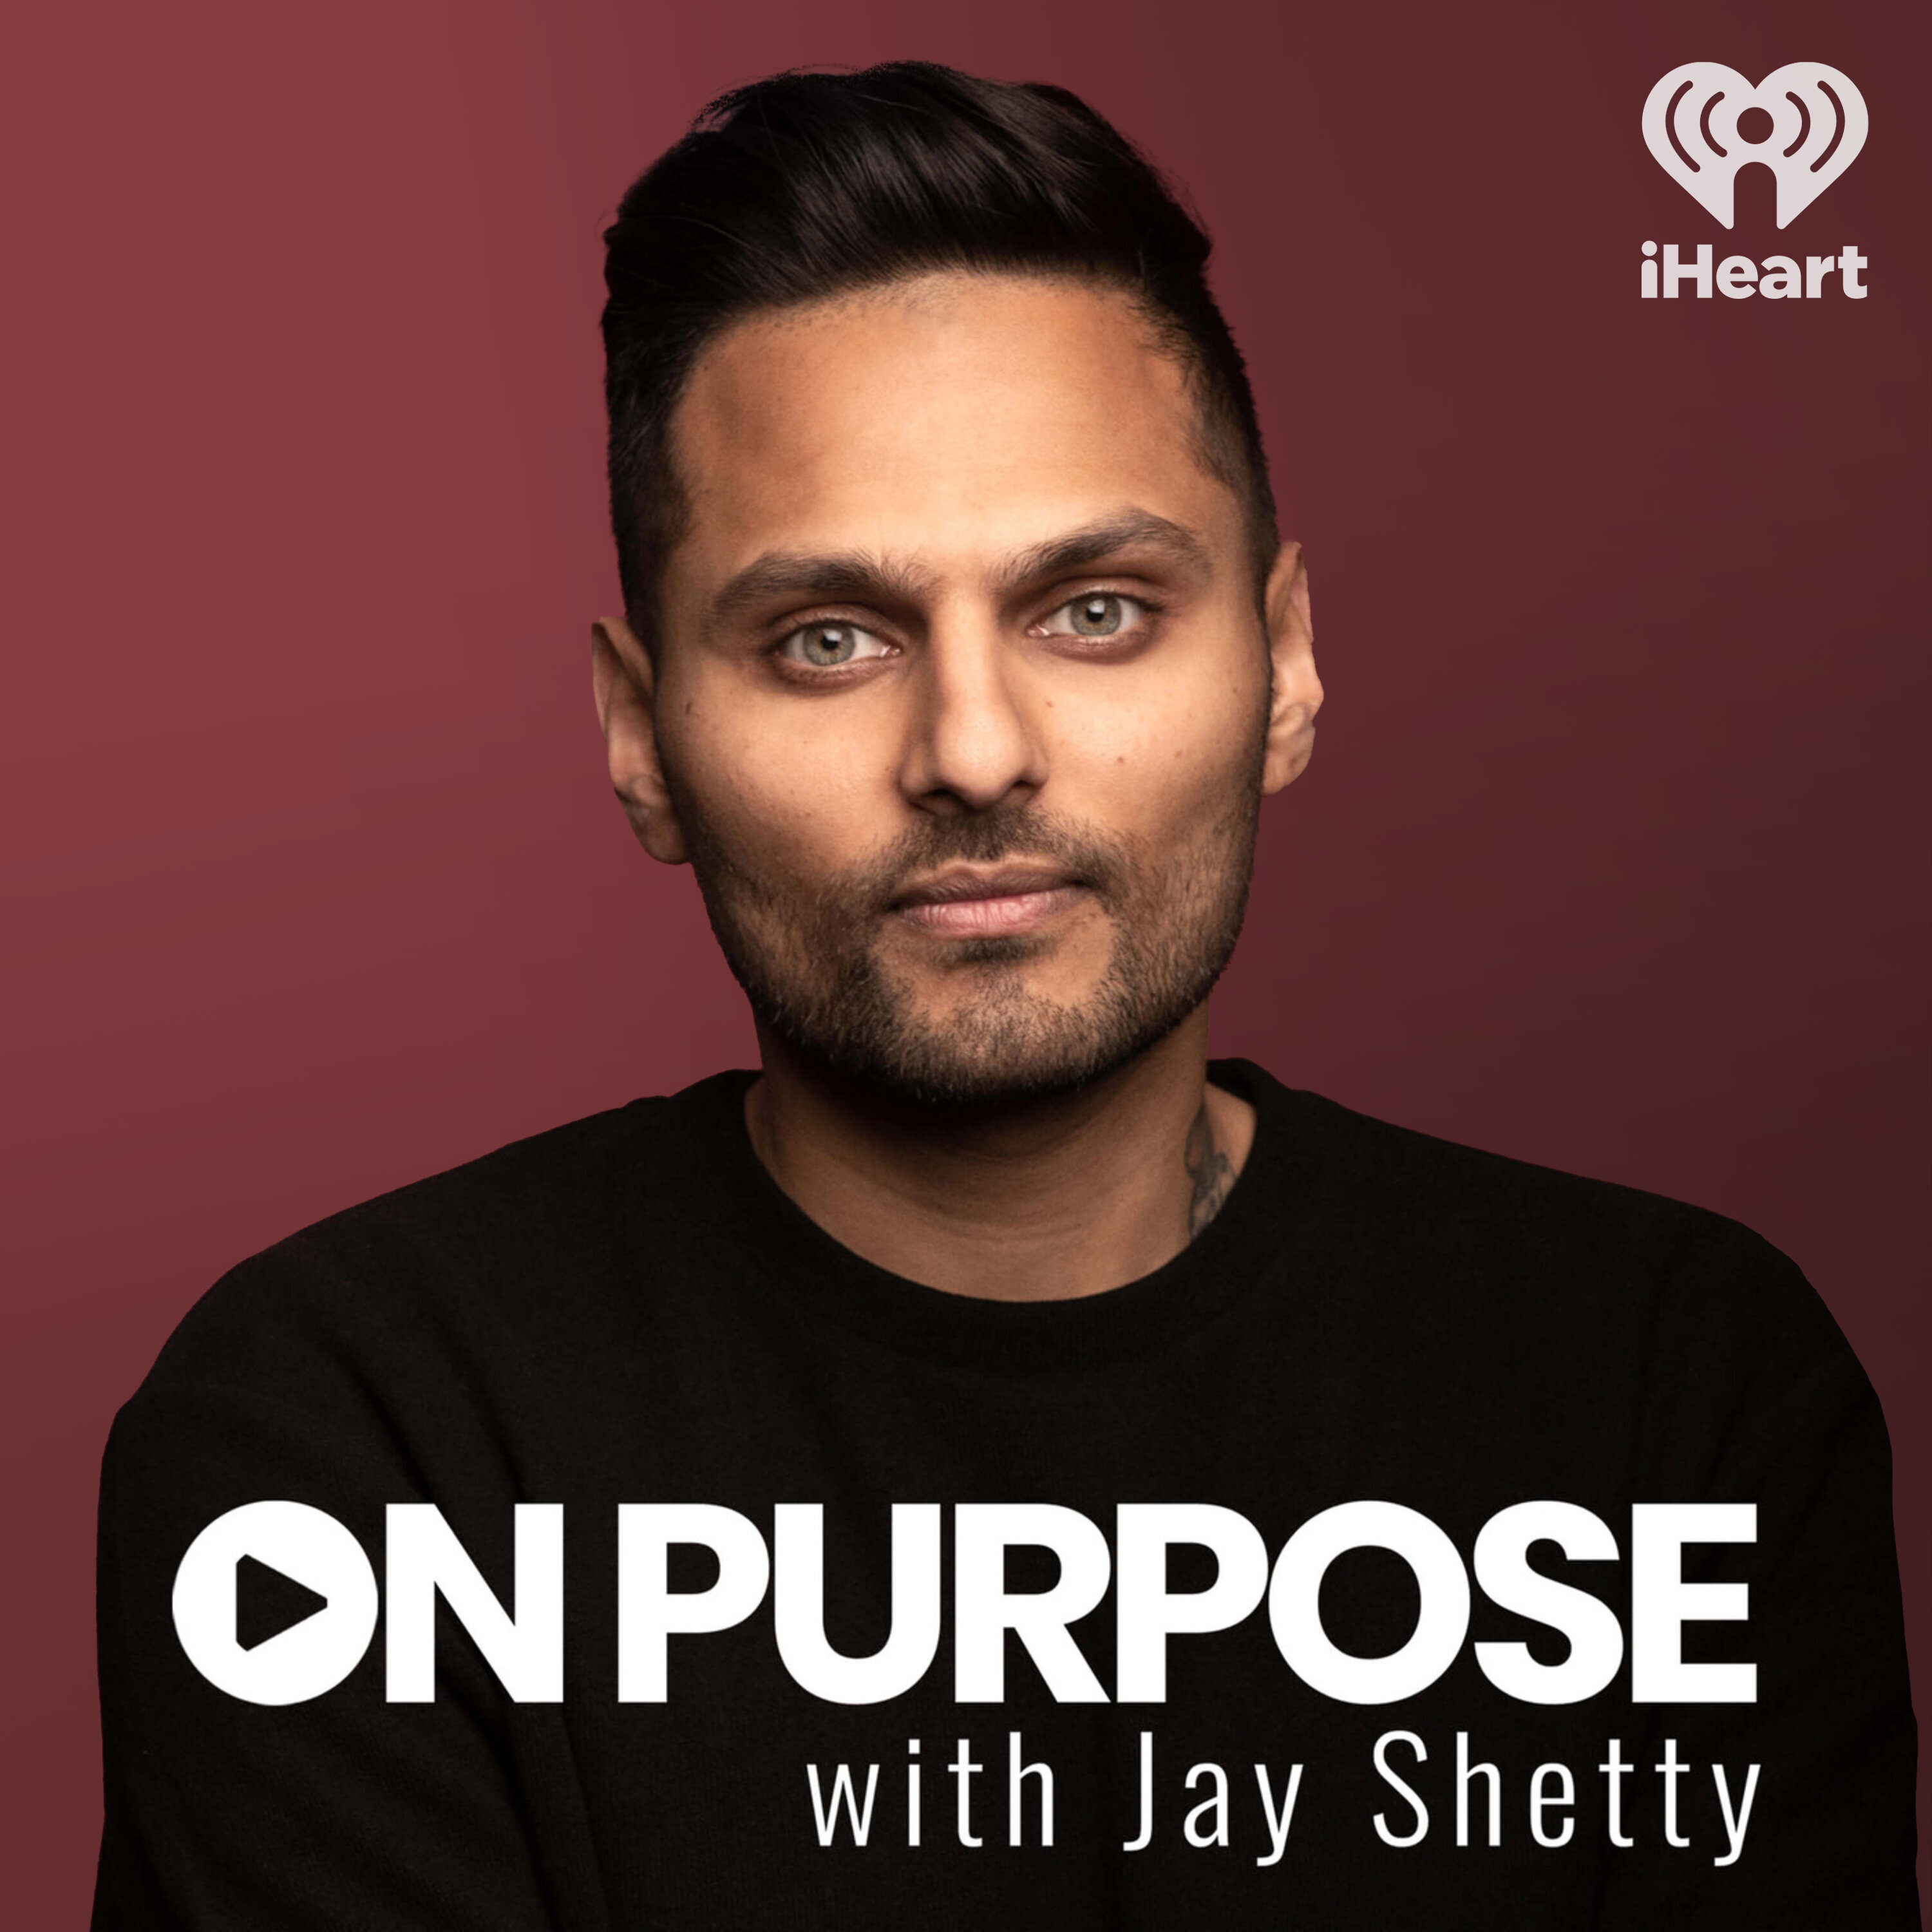 Jay Shetty's Formula for Producing Online Content